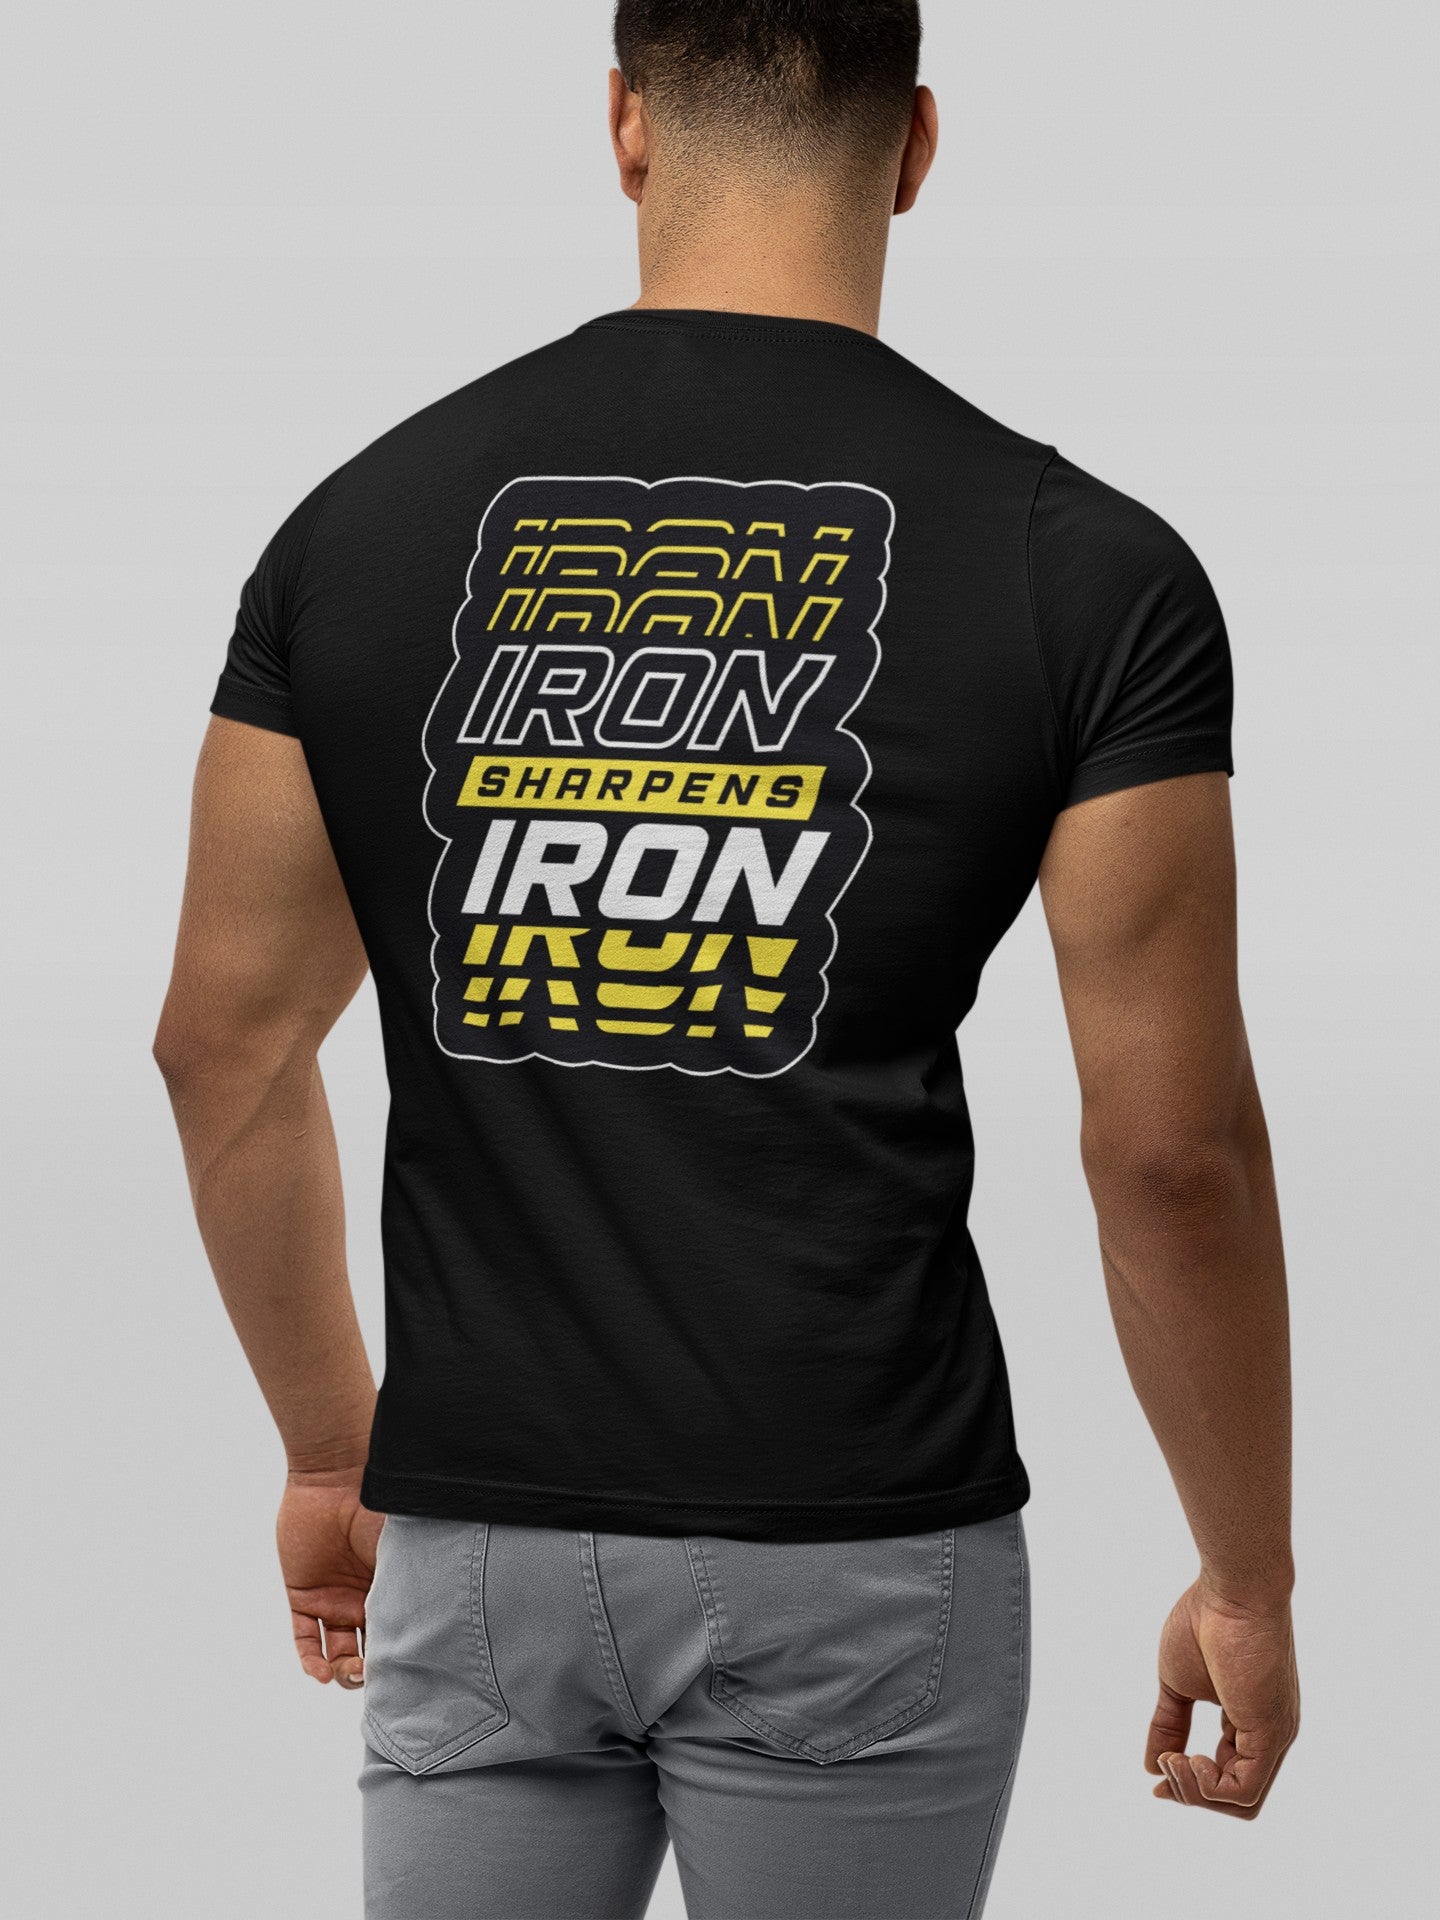 Gym T Shirt - Iron Sharpens Iron. The Sports T Shirt by Strong Soul